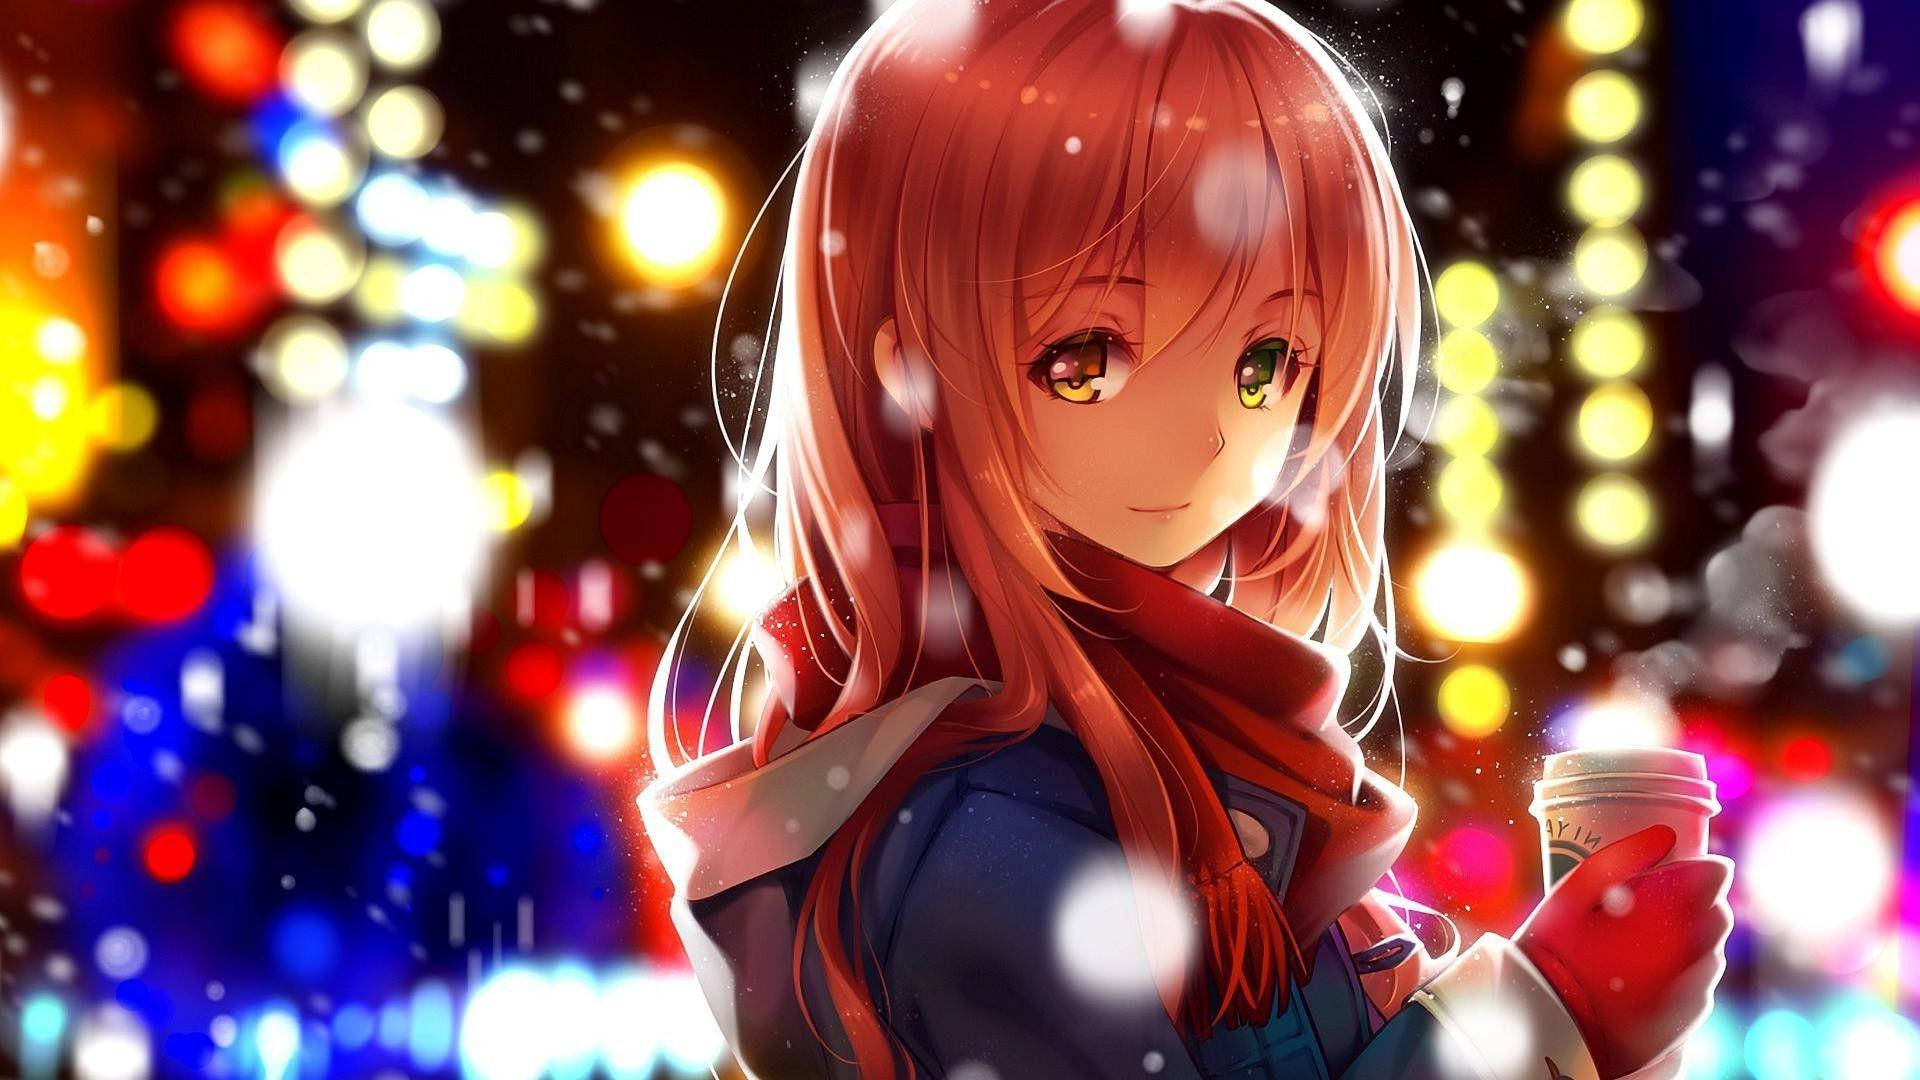 Cute Anime Characters In Snow Background